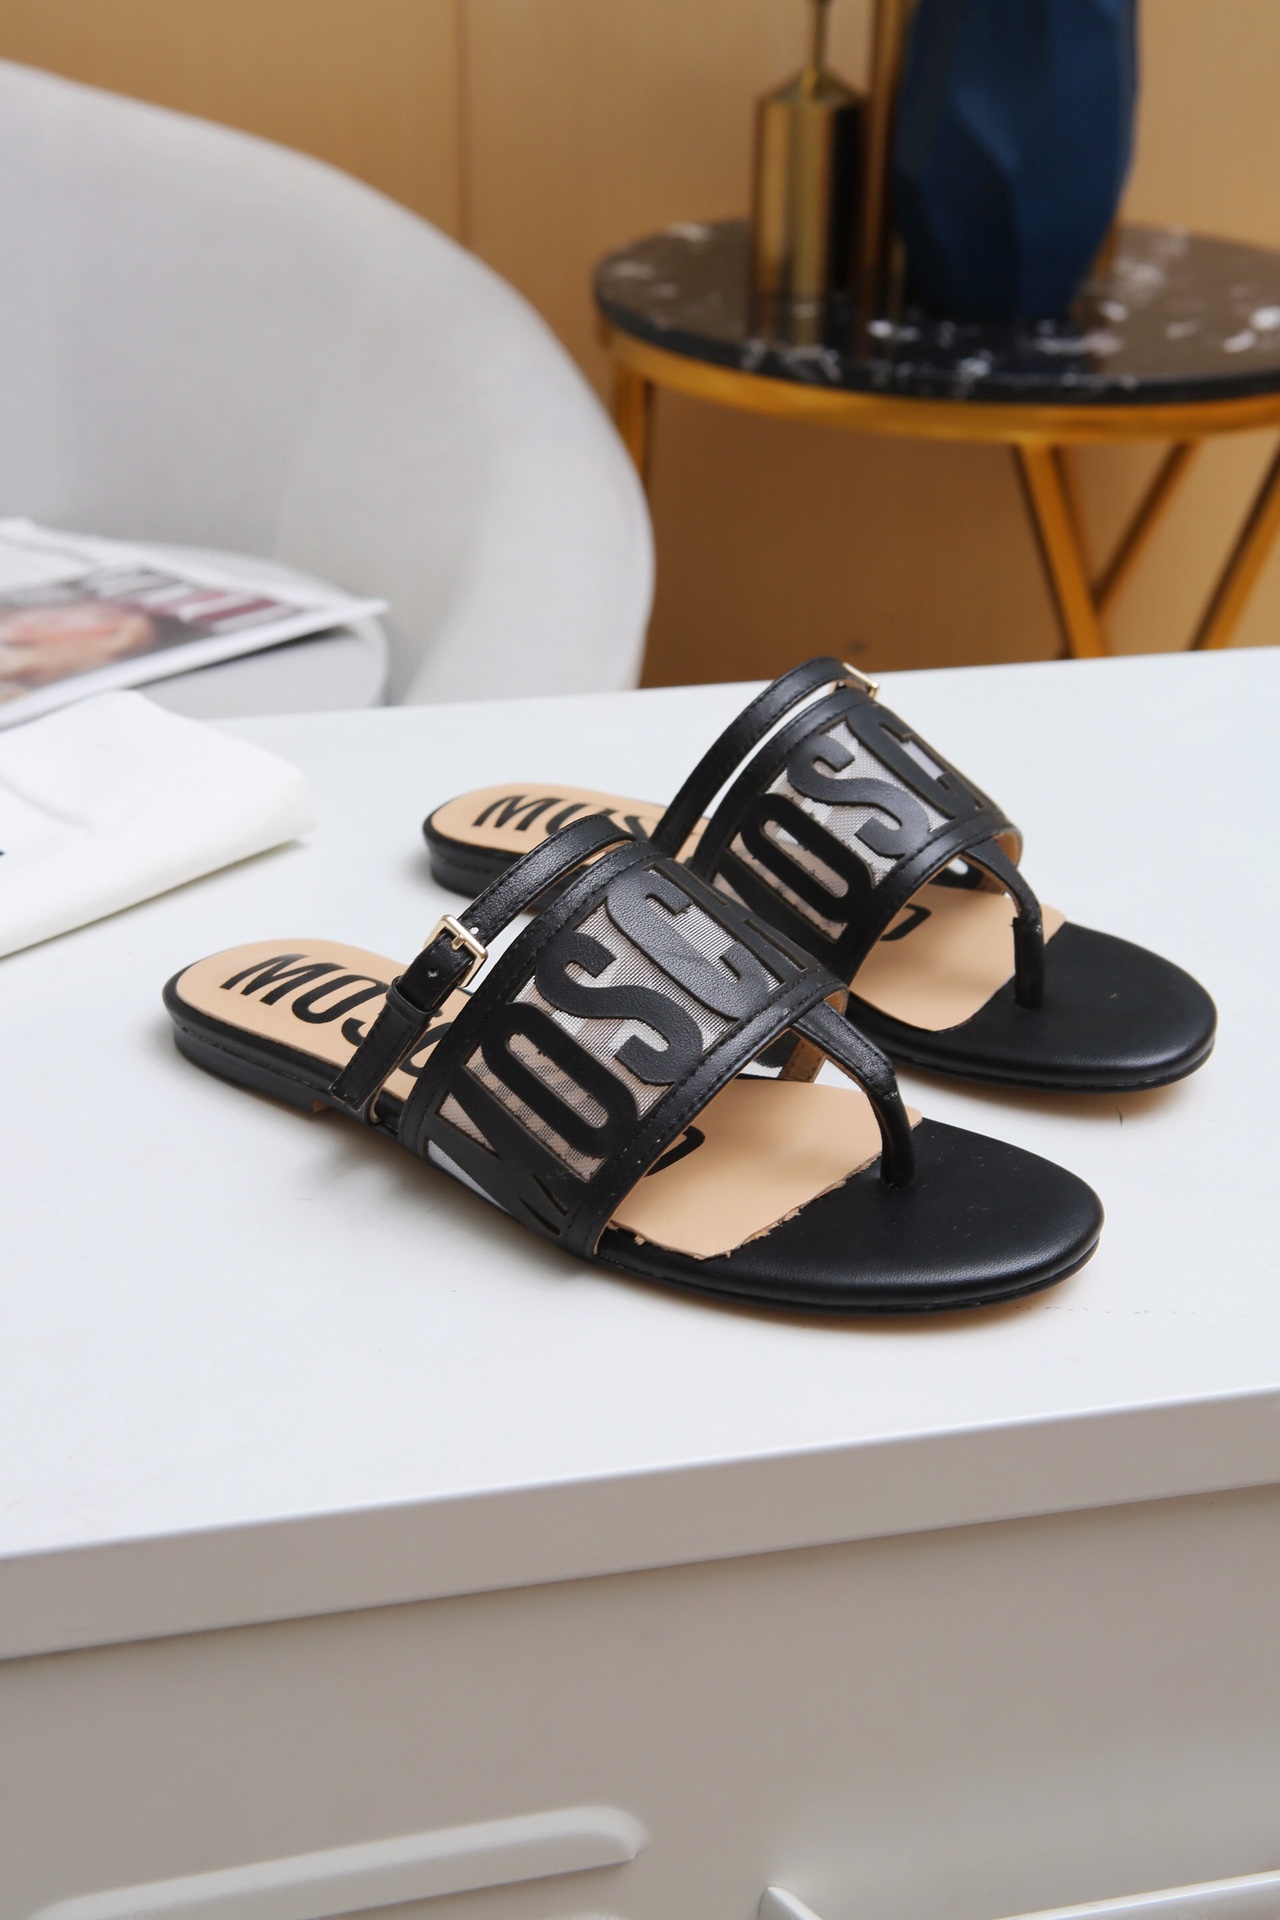 Moschino Slide Sandals For Women # 250992, cheap Moschino Sandals, only $69!